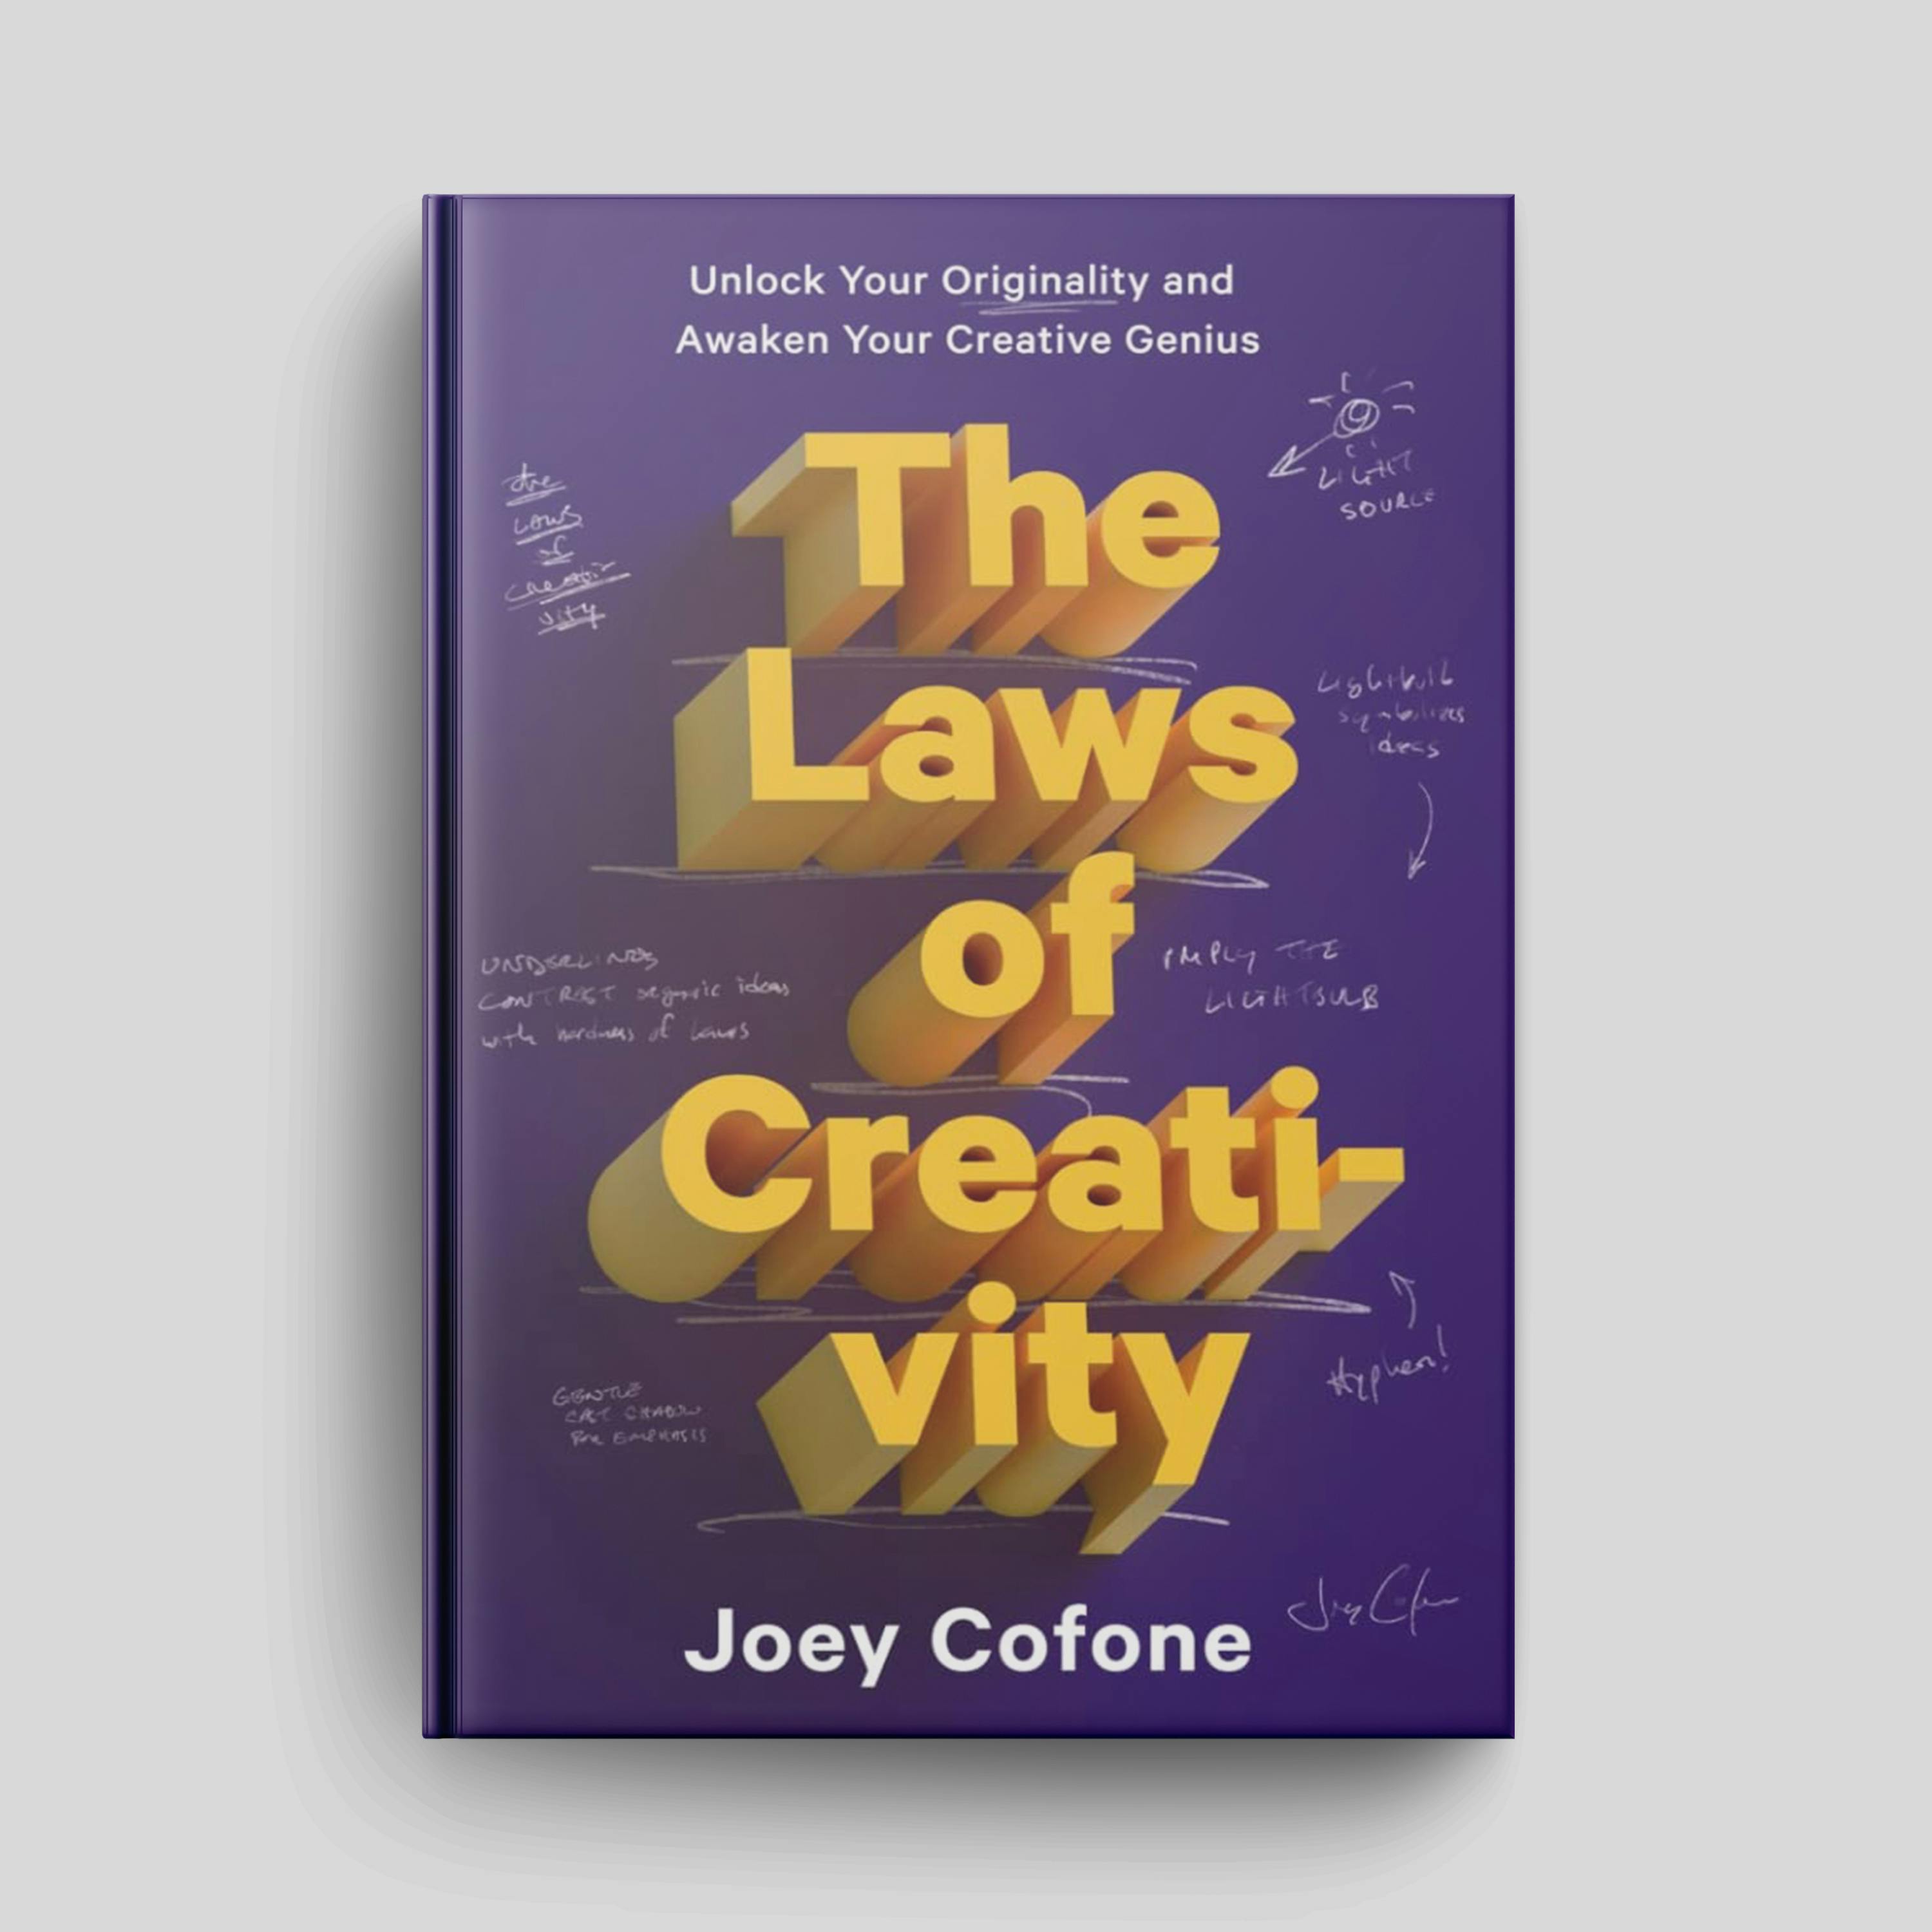 Trailer - Book: "The Laws of Creativity: How to Unlock Your Originality and Awaken Your Creative Genius" | Episode #142